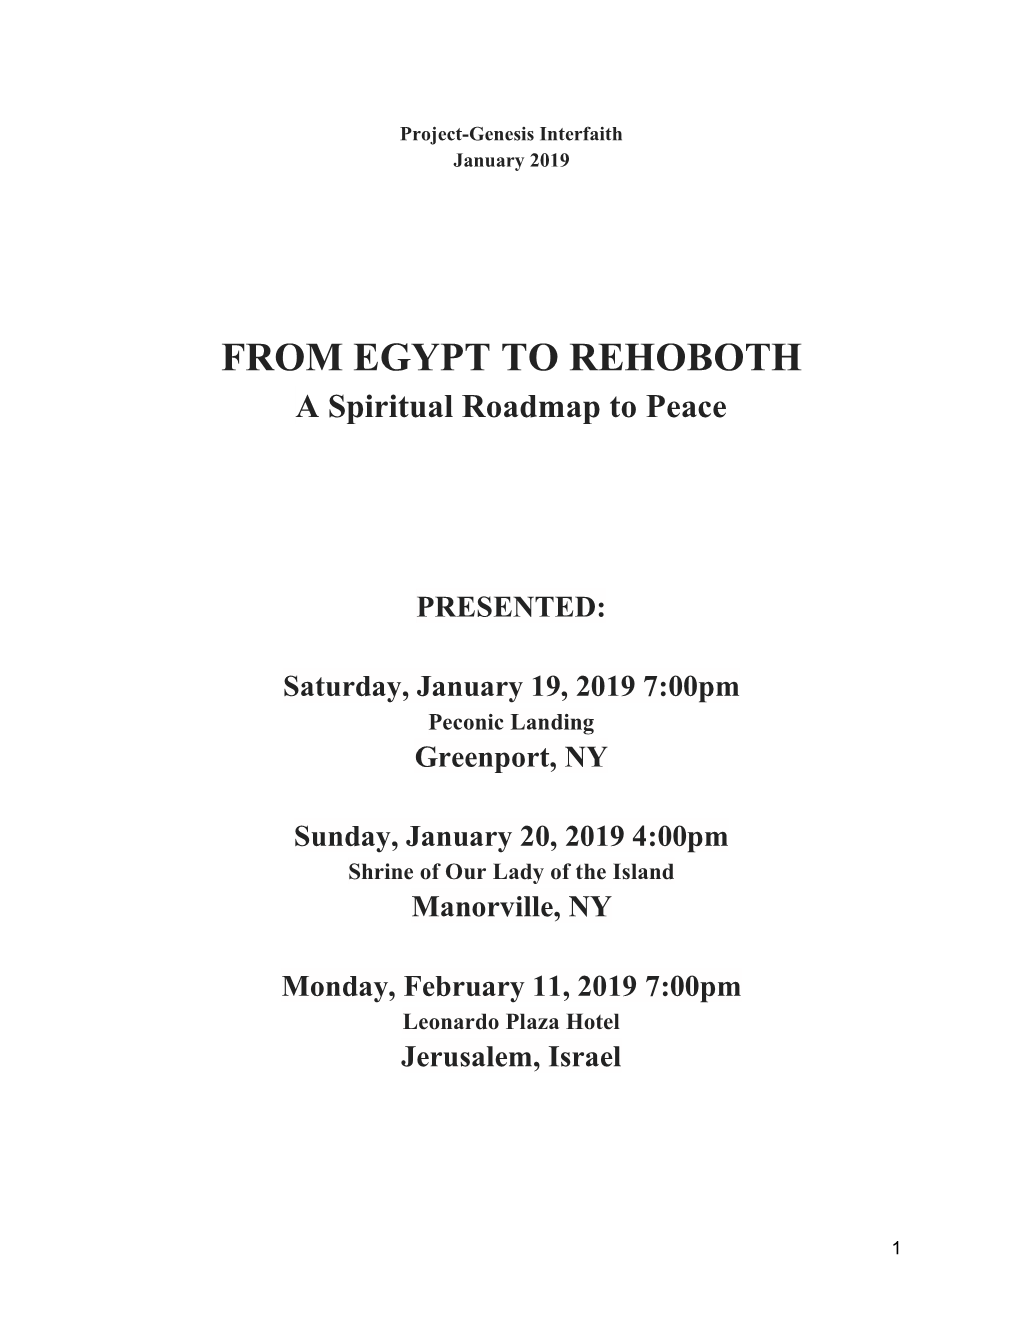 FROM EGYPT to REHOBOTH a Spiritual Roadmap to Peace